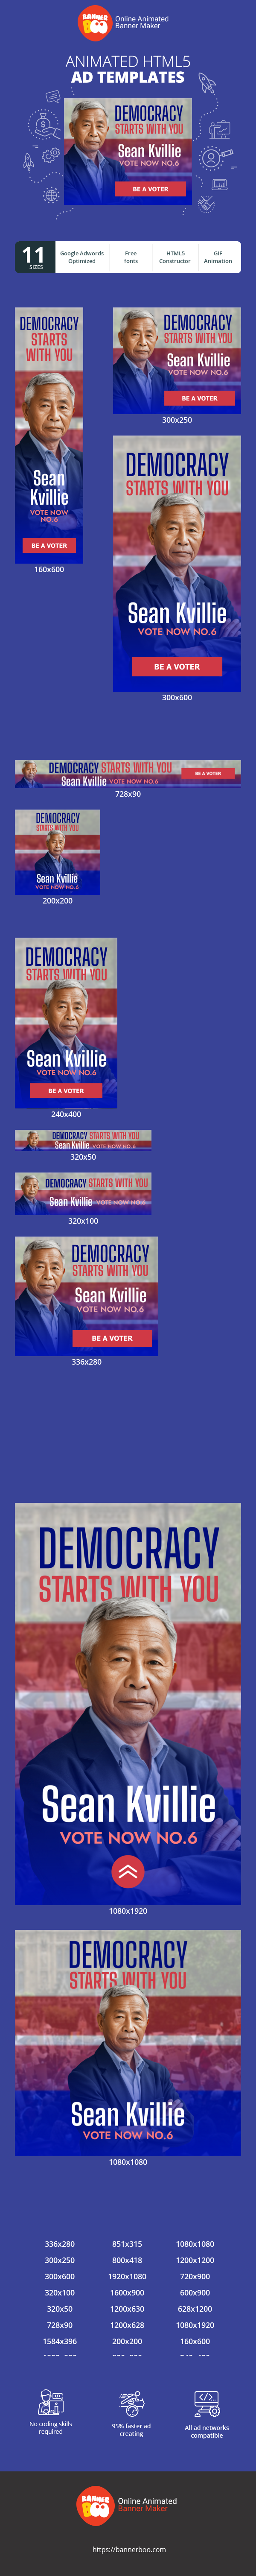 Banner ad template — Democracy Starts With You Sean Kvillie Vote Now NO.6 — Election Day